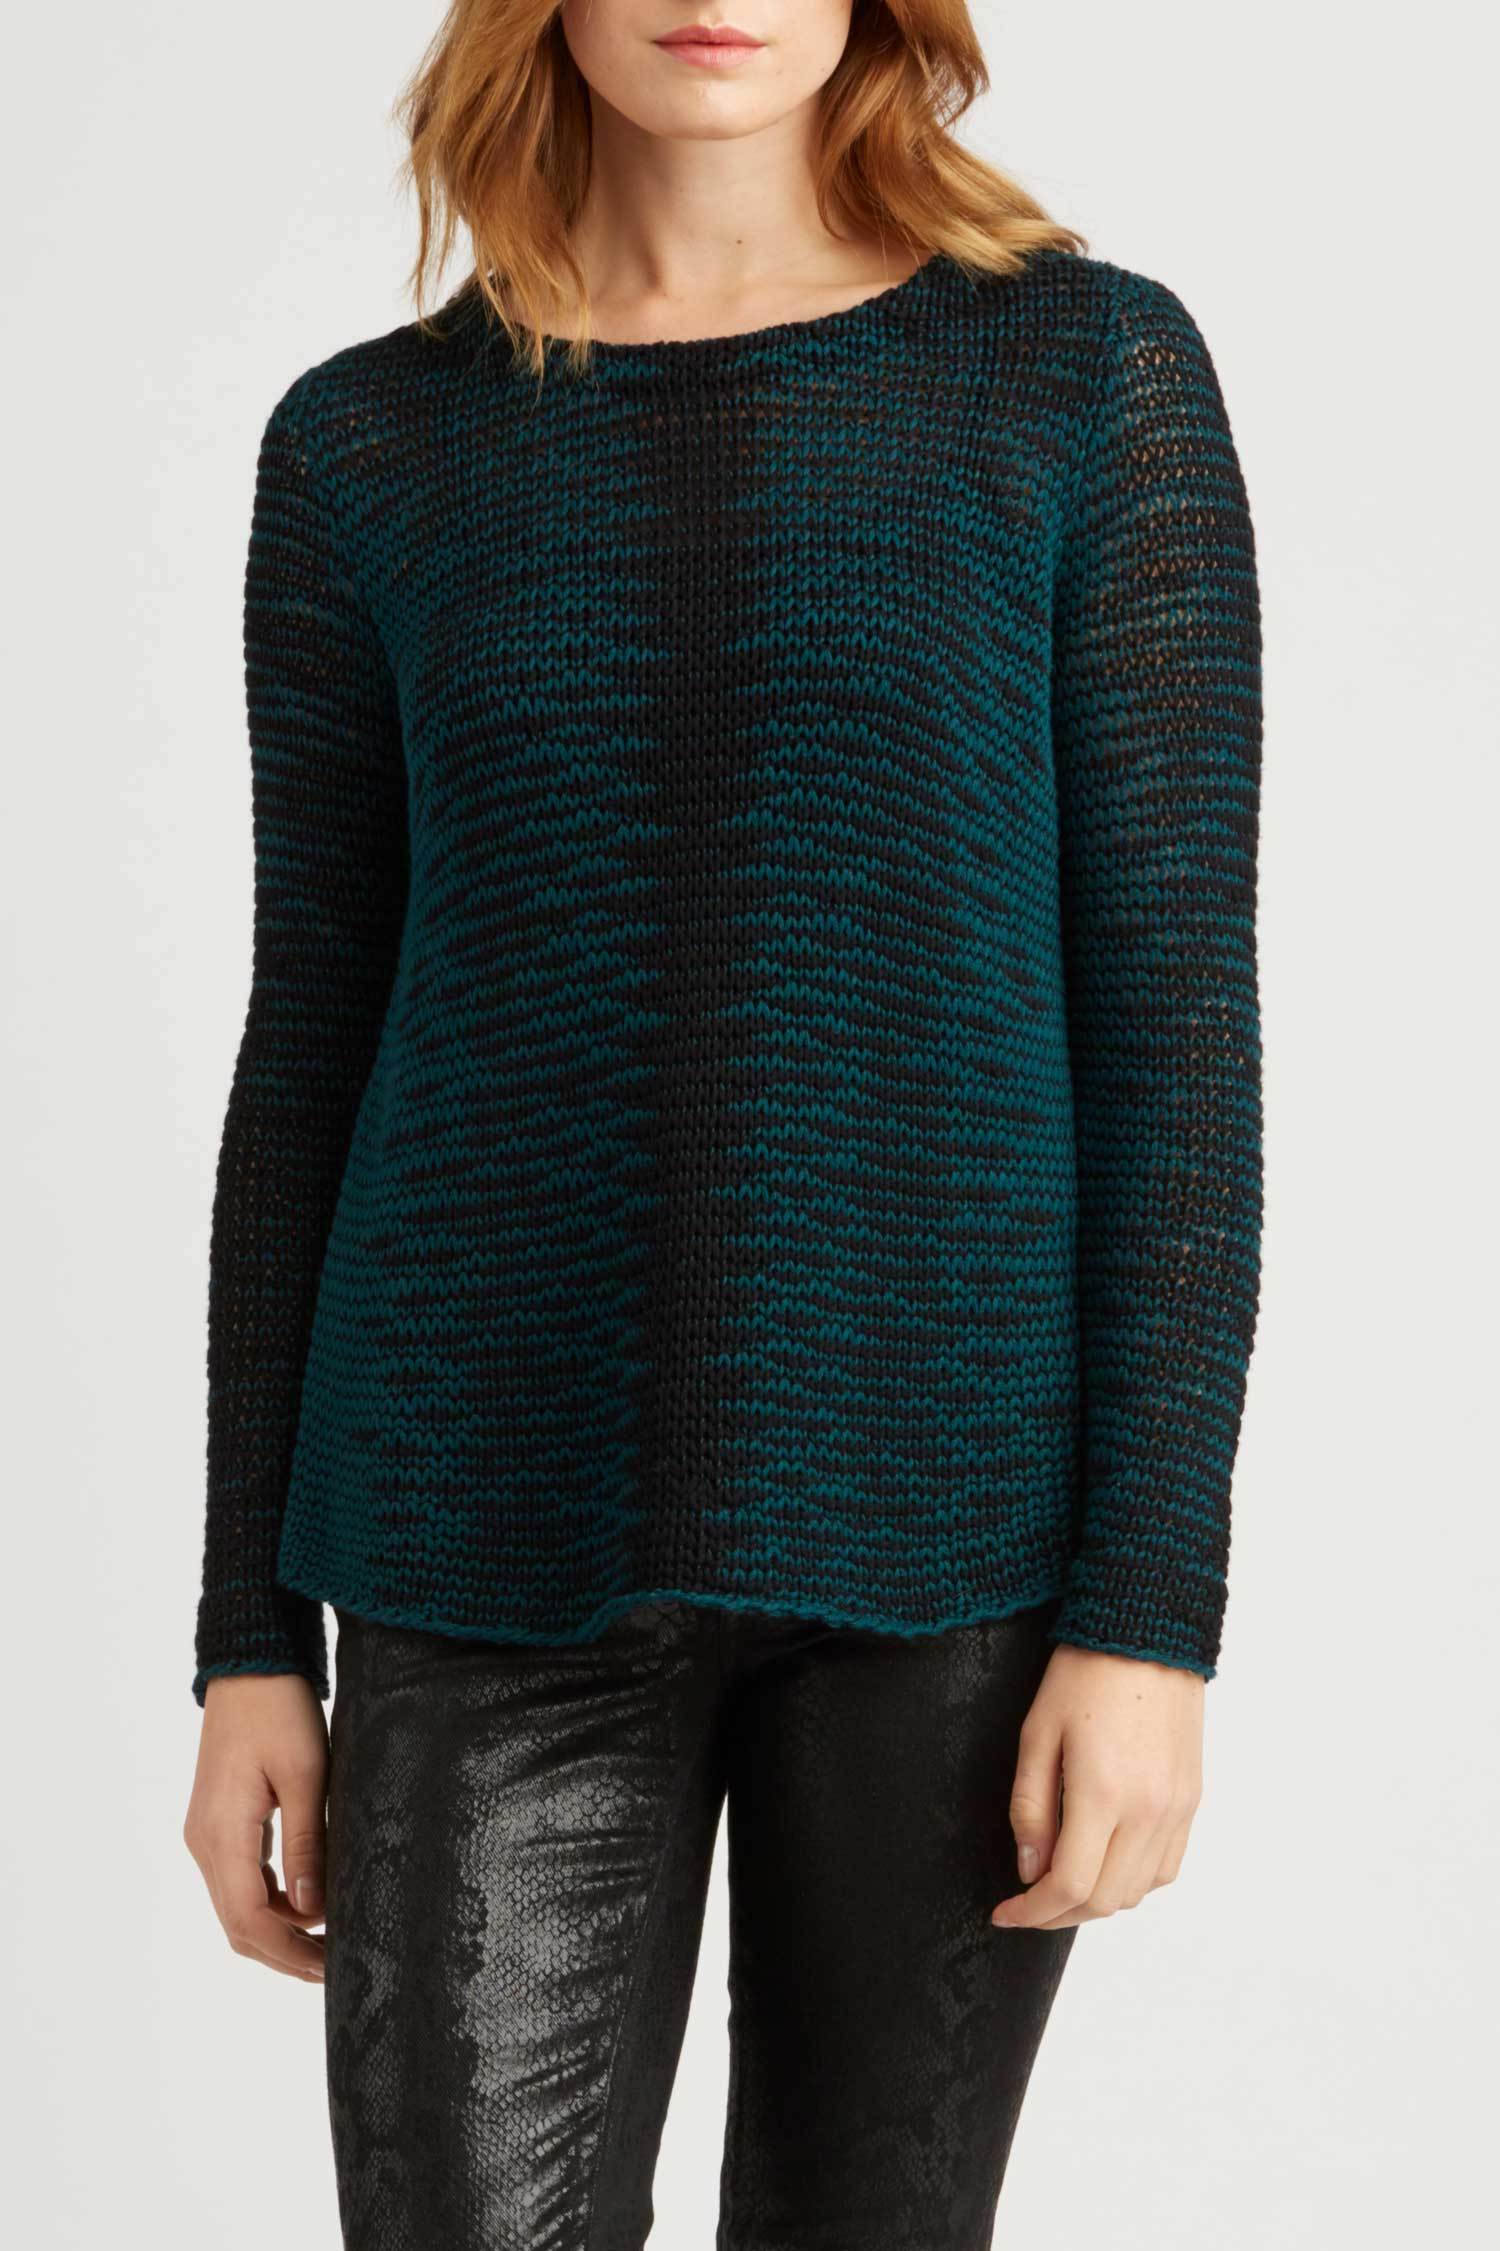 Womens Teal and Black Patterned Knit Sweater | Organic Cotton